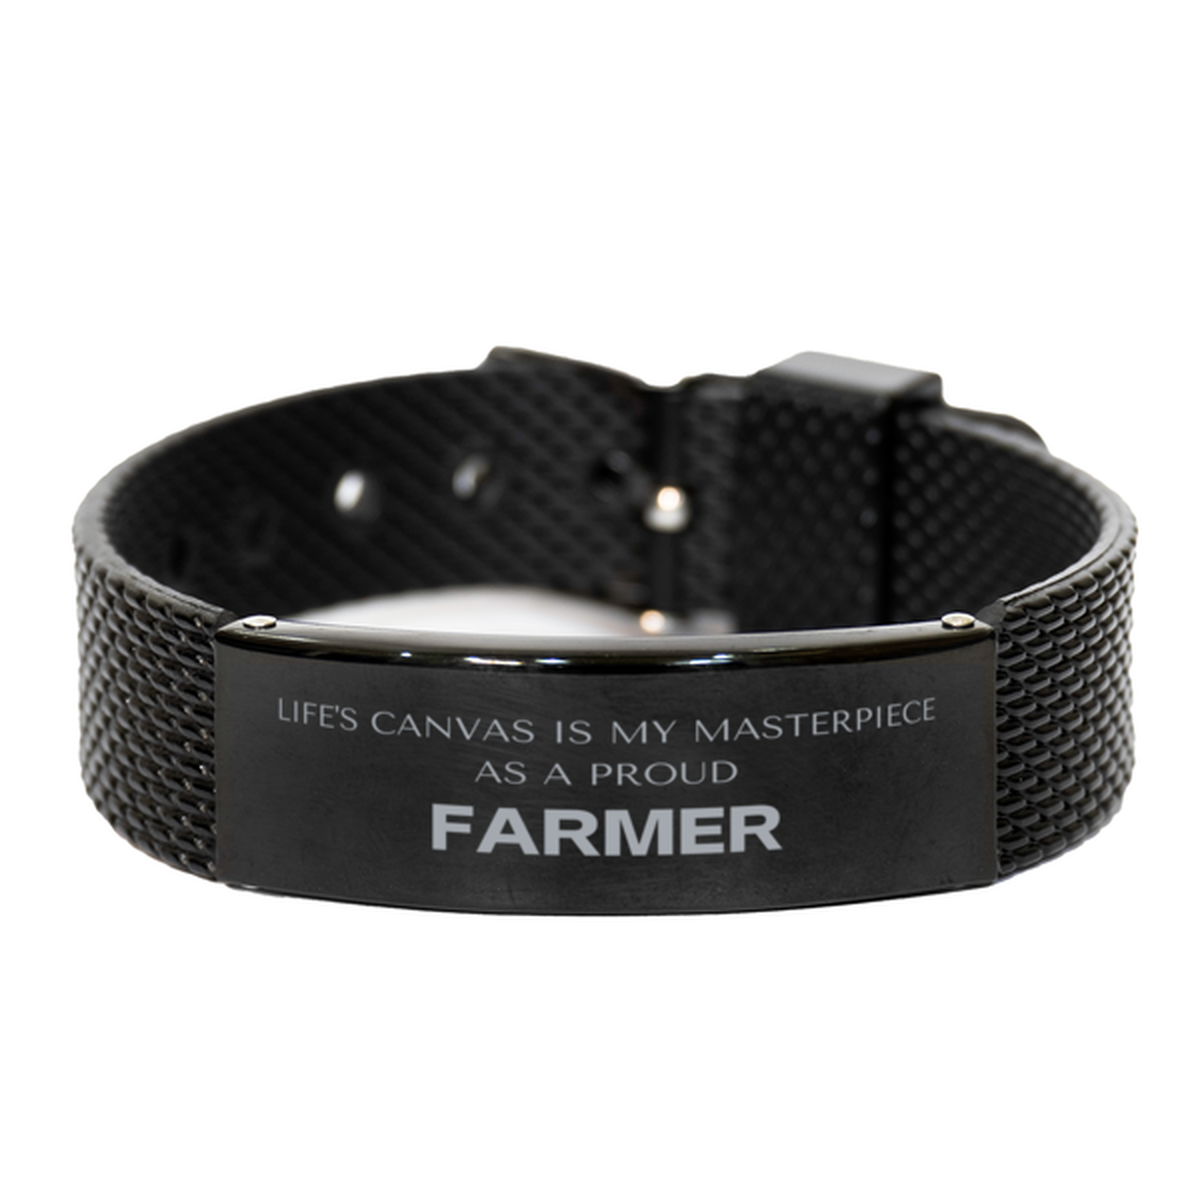 Proud Farmer Gifts, Life's canvas is my masterpiece, Epic Birthday Christmas Unique Black Shark Mesh Bracelet For Farmer, Coworkers, Men, Women, Friends